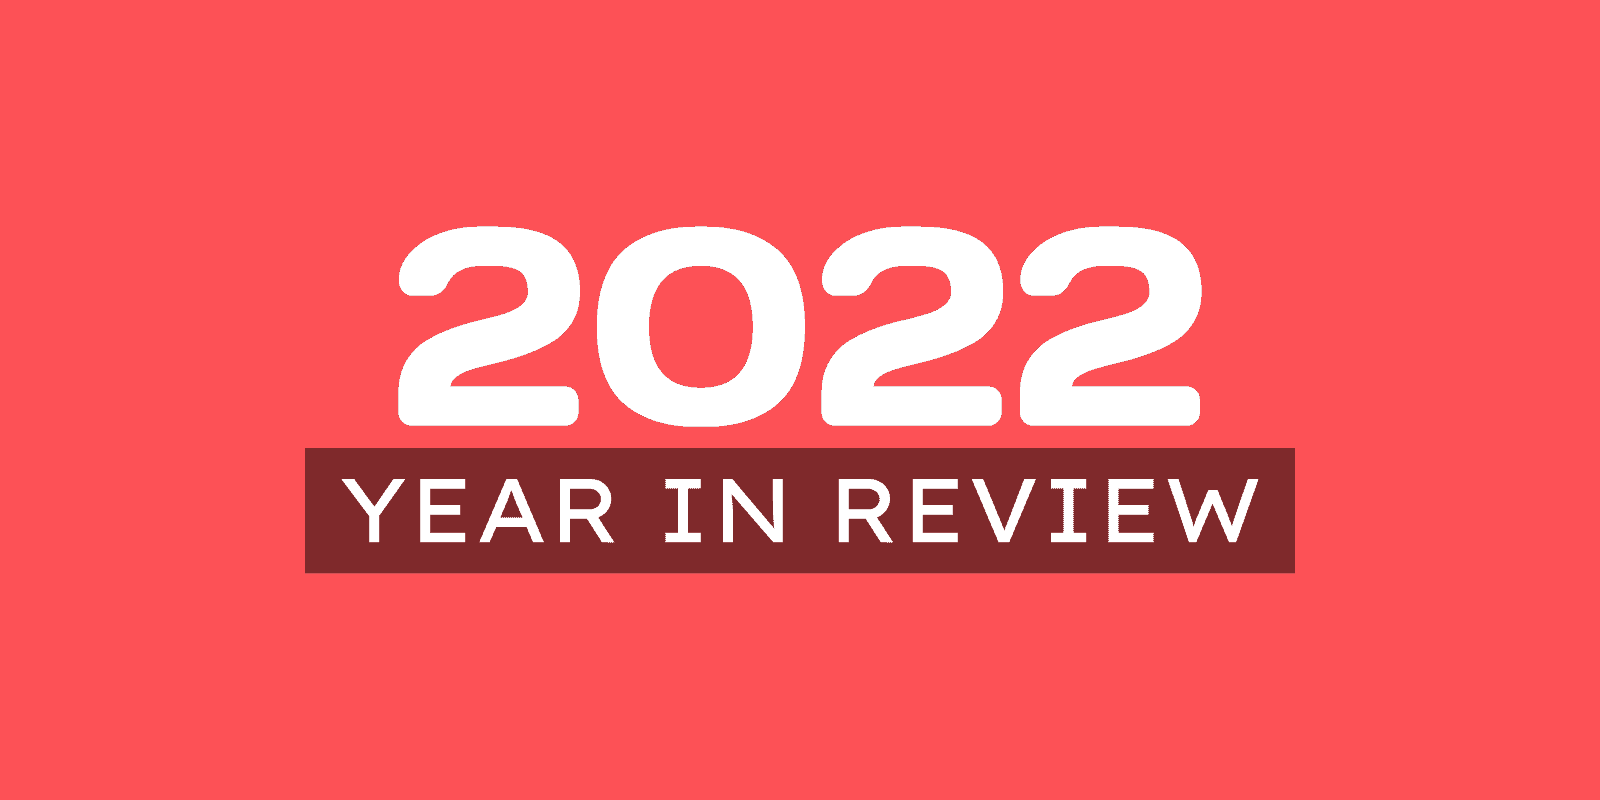 Year in Review: July 2022